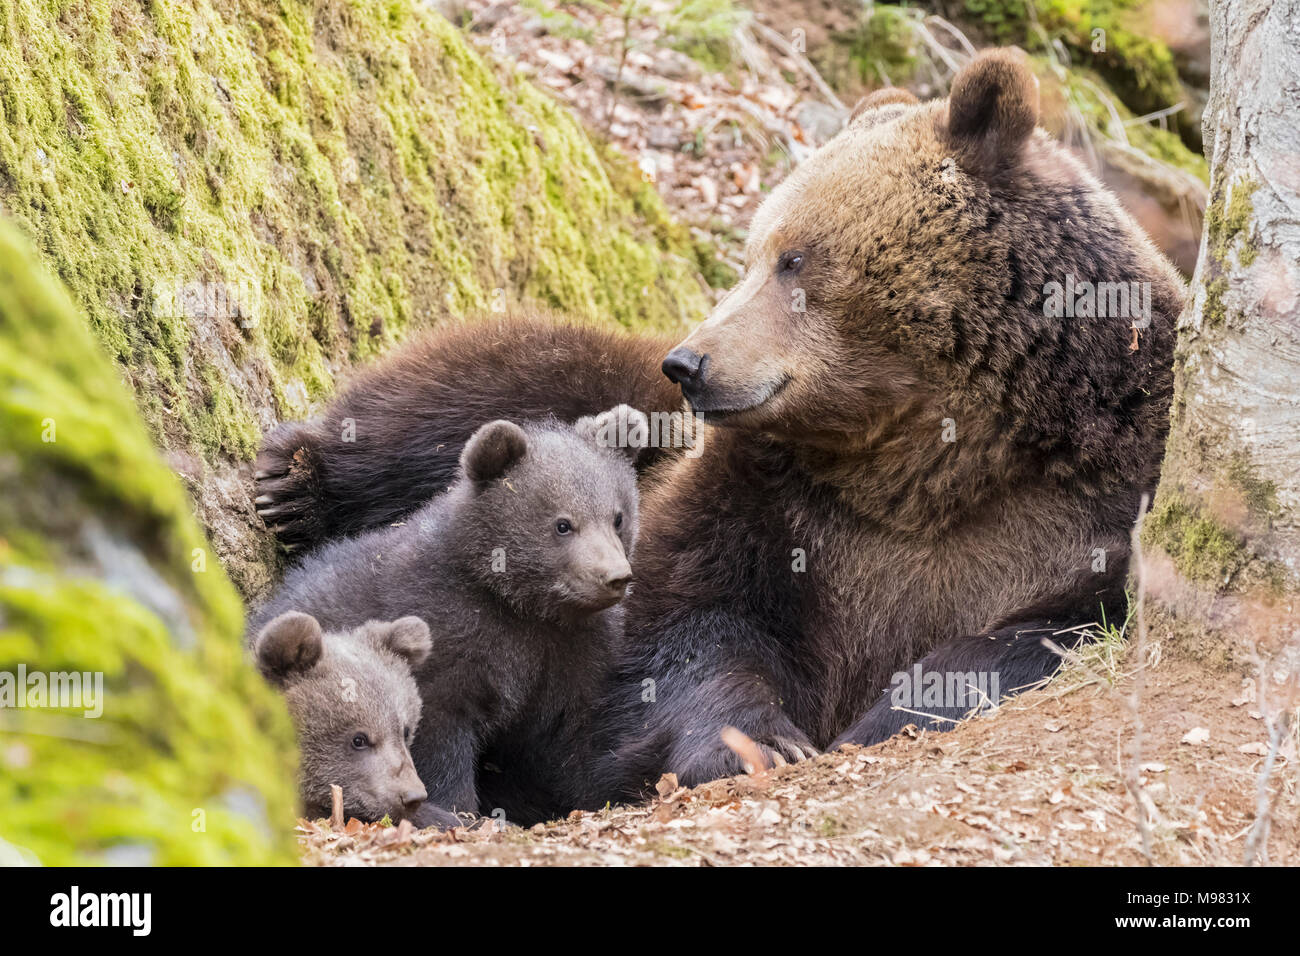 Germany, Bavarian Forest National Park, animal Open-air site Neuschoenau, brown bear, Ursus arctos, mother animal with young animals Stock Photo